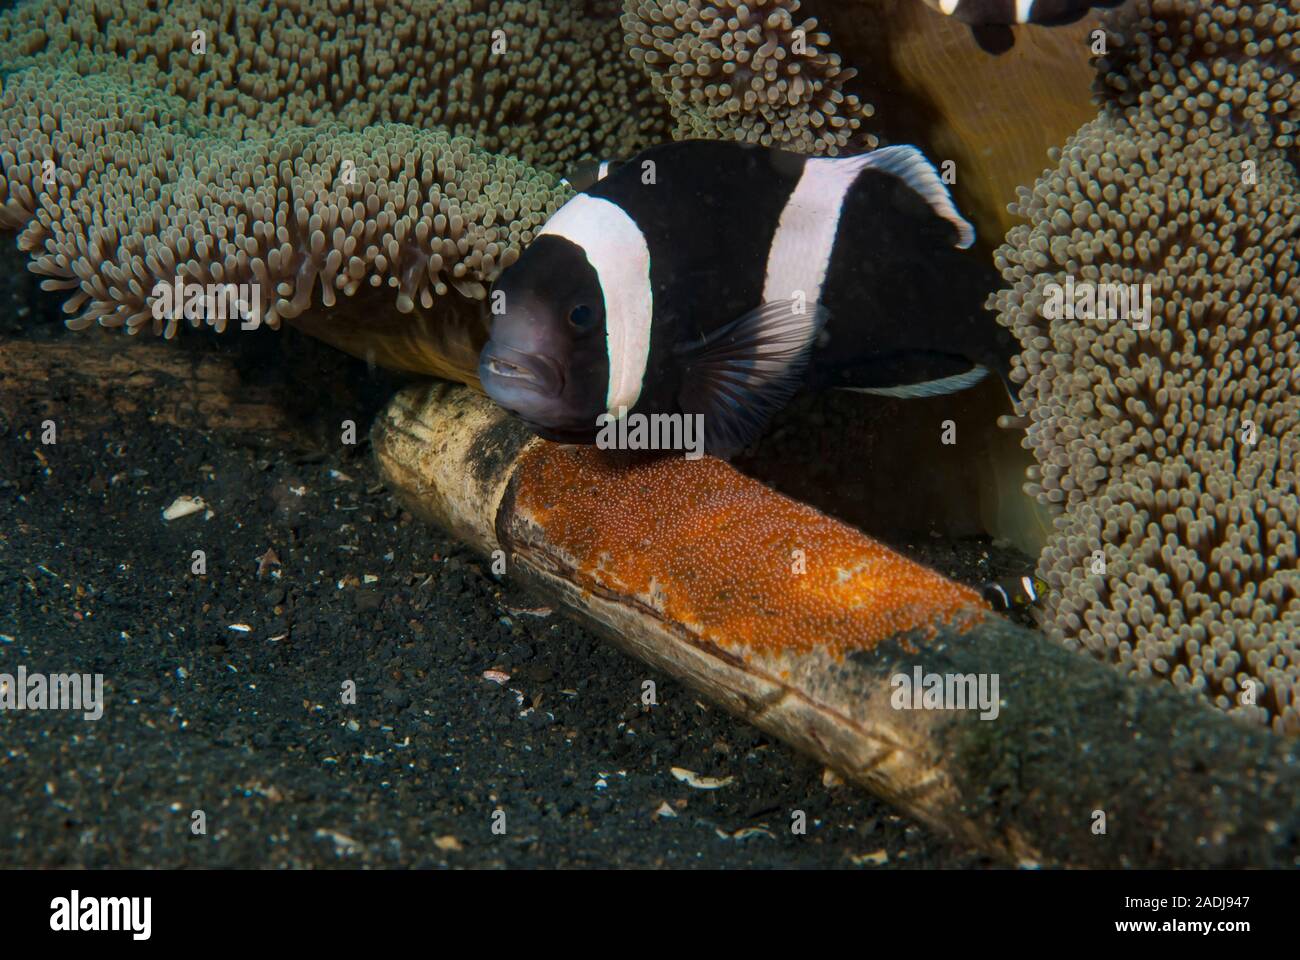 Anemonefish (or Clownfish) live in a symbiotic relationship with sea anemones. These little fish protect the anemone for predators like butteflyfish, Stock Photo